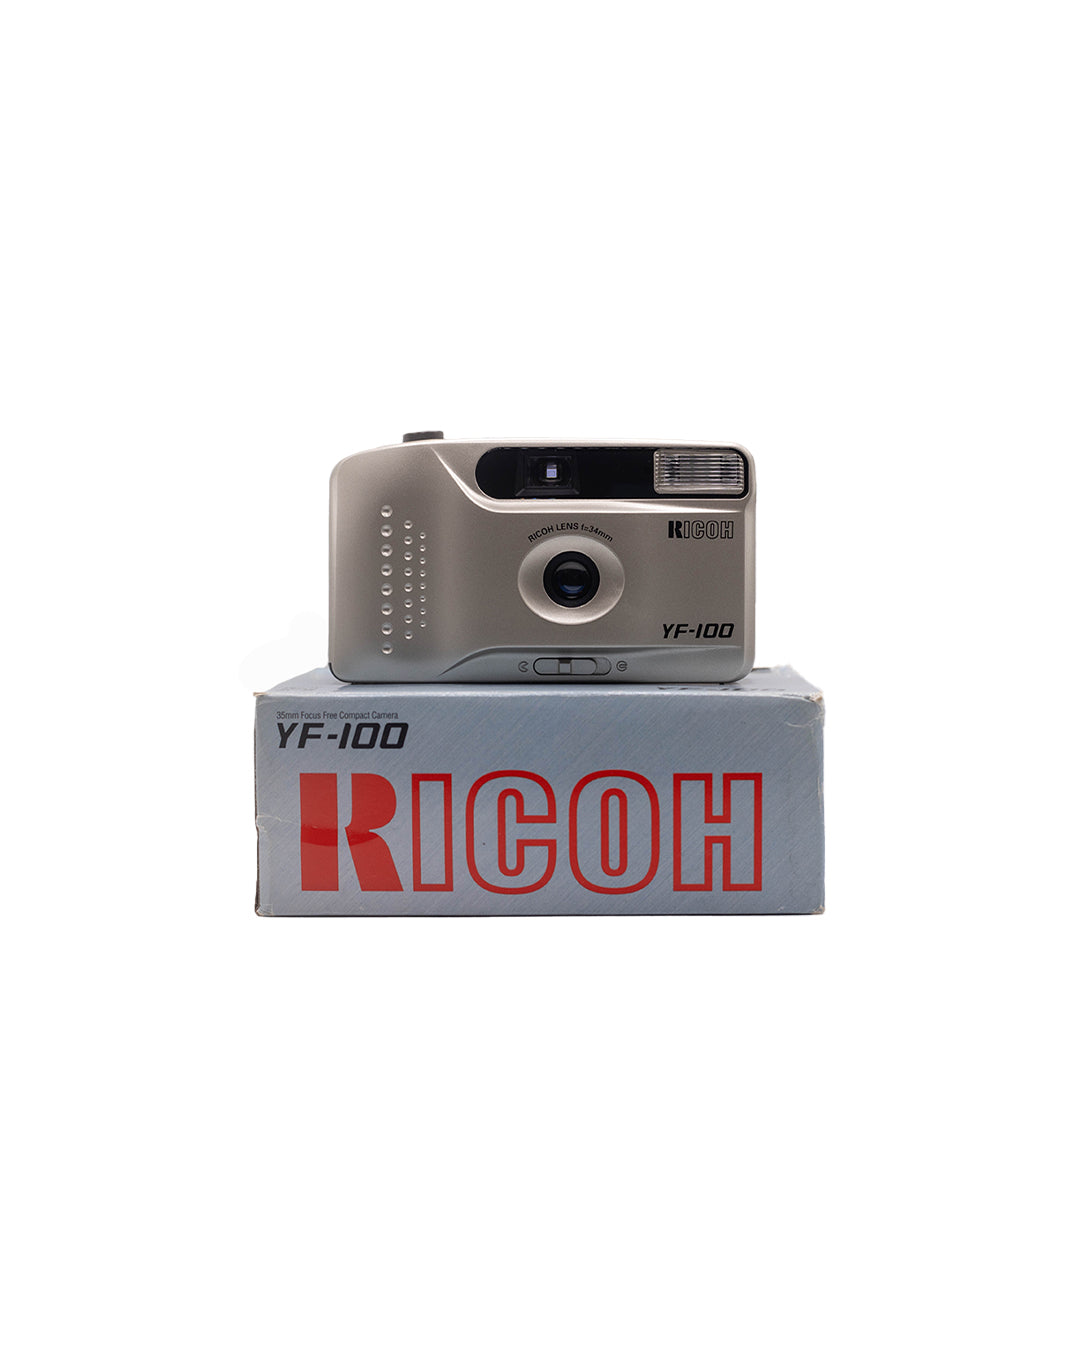 *NEW Ricoh YF-100 35mm Point & Shoot Camera with 35mm with f/3.9 lens